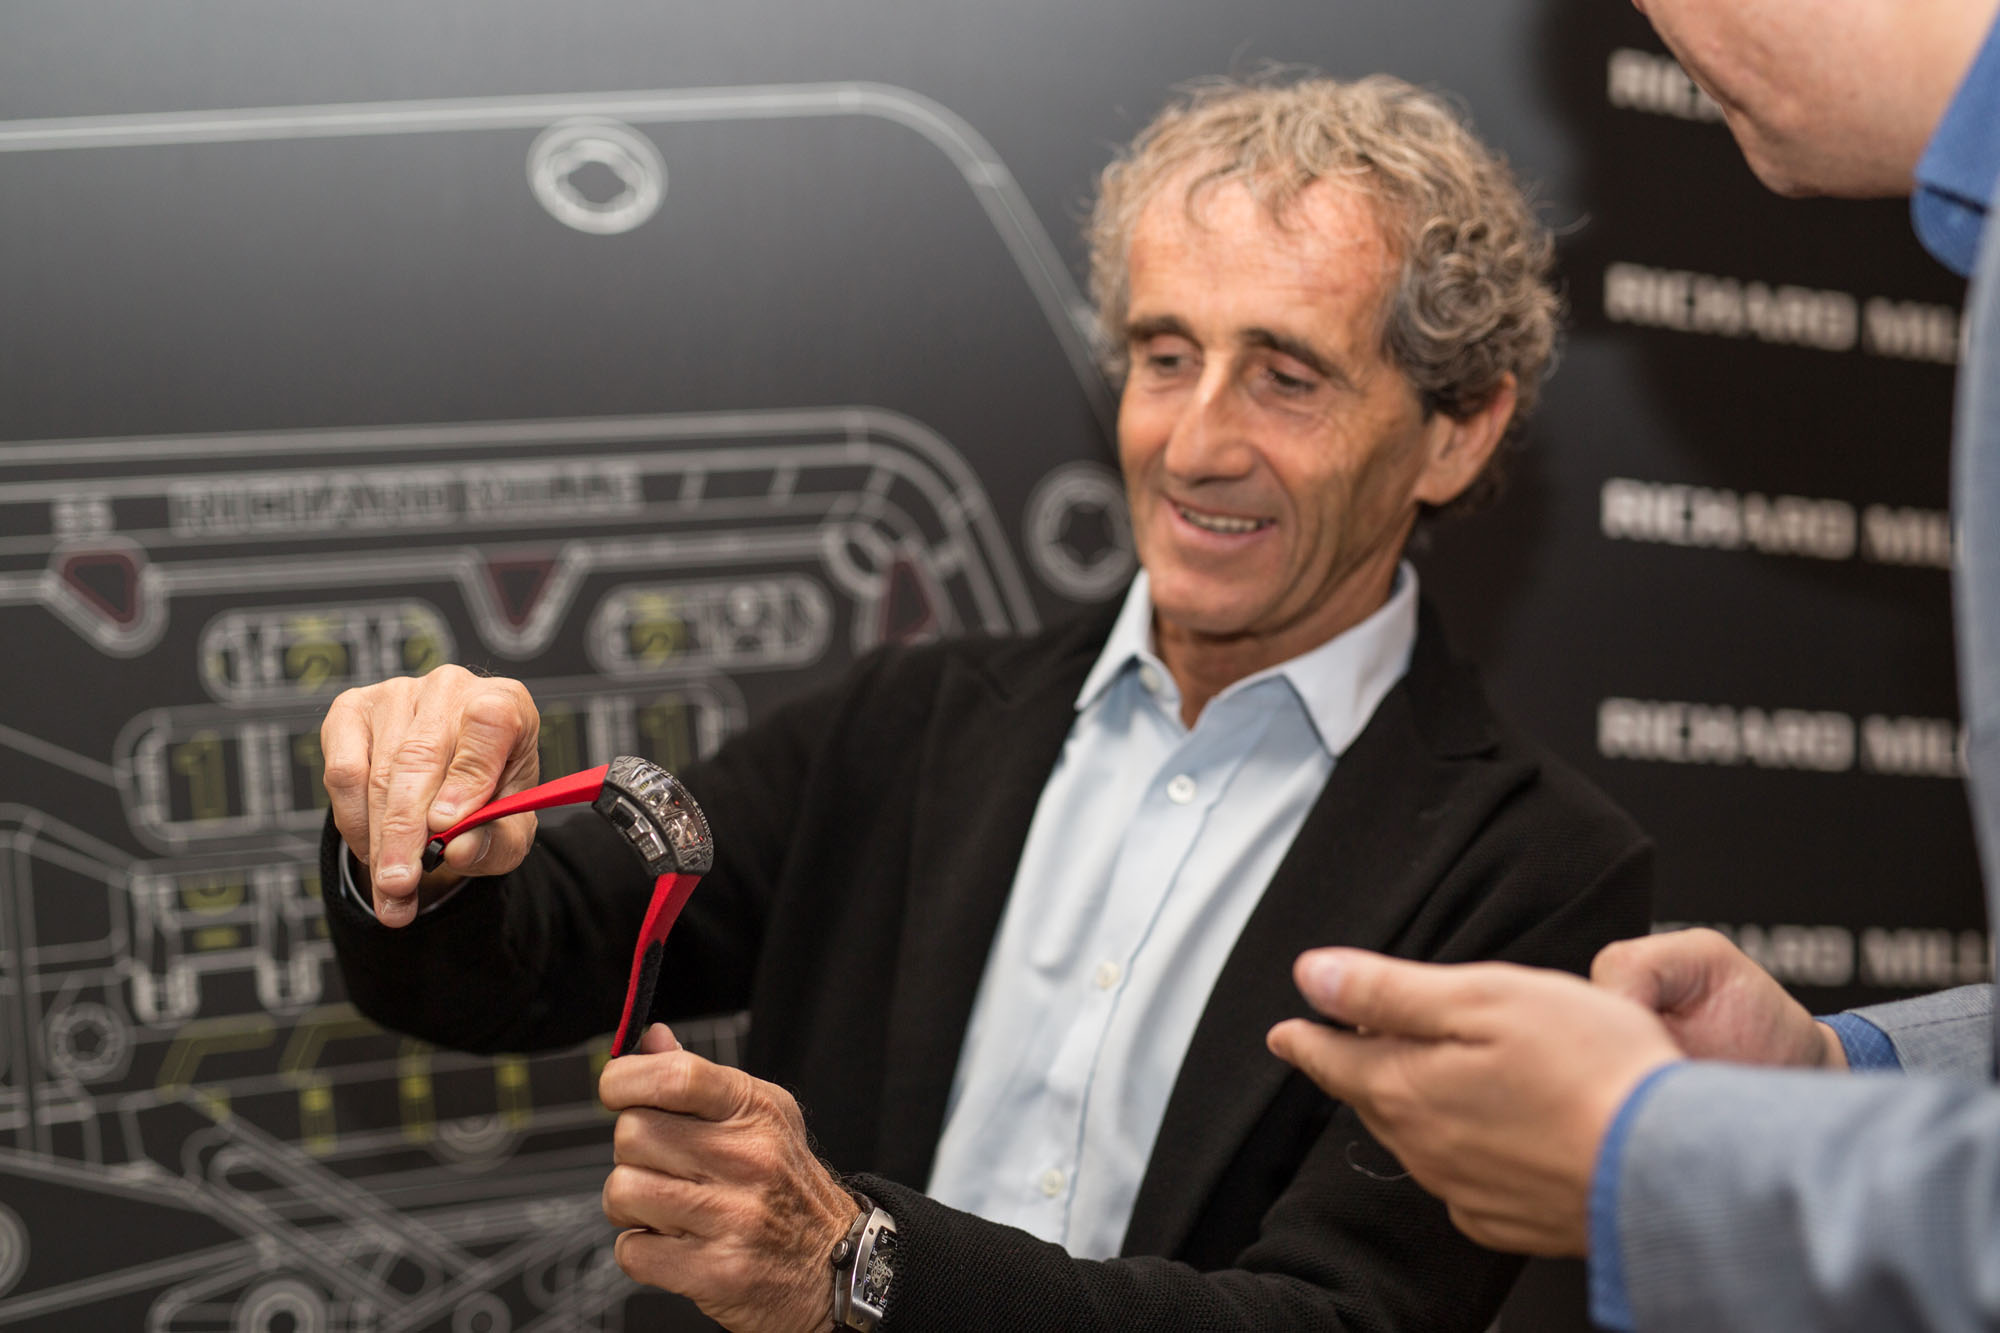 Alain Prost showing off the new RM70-01 watch